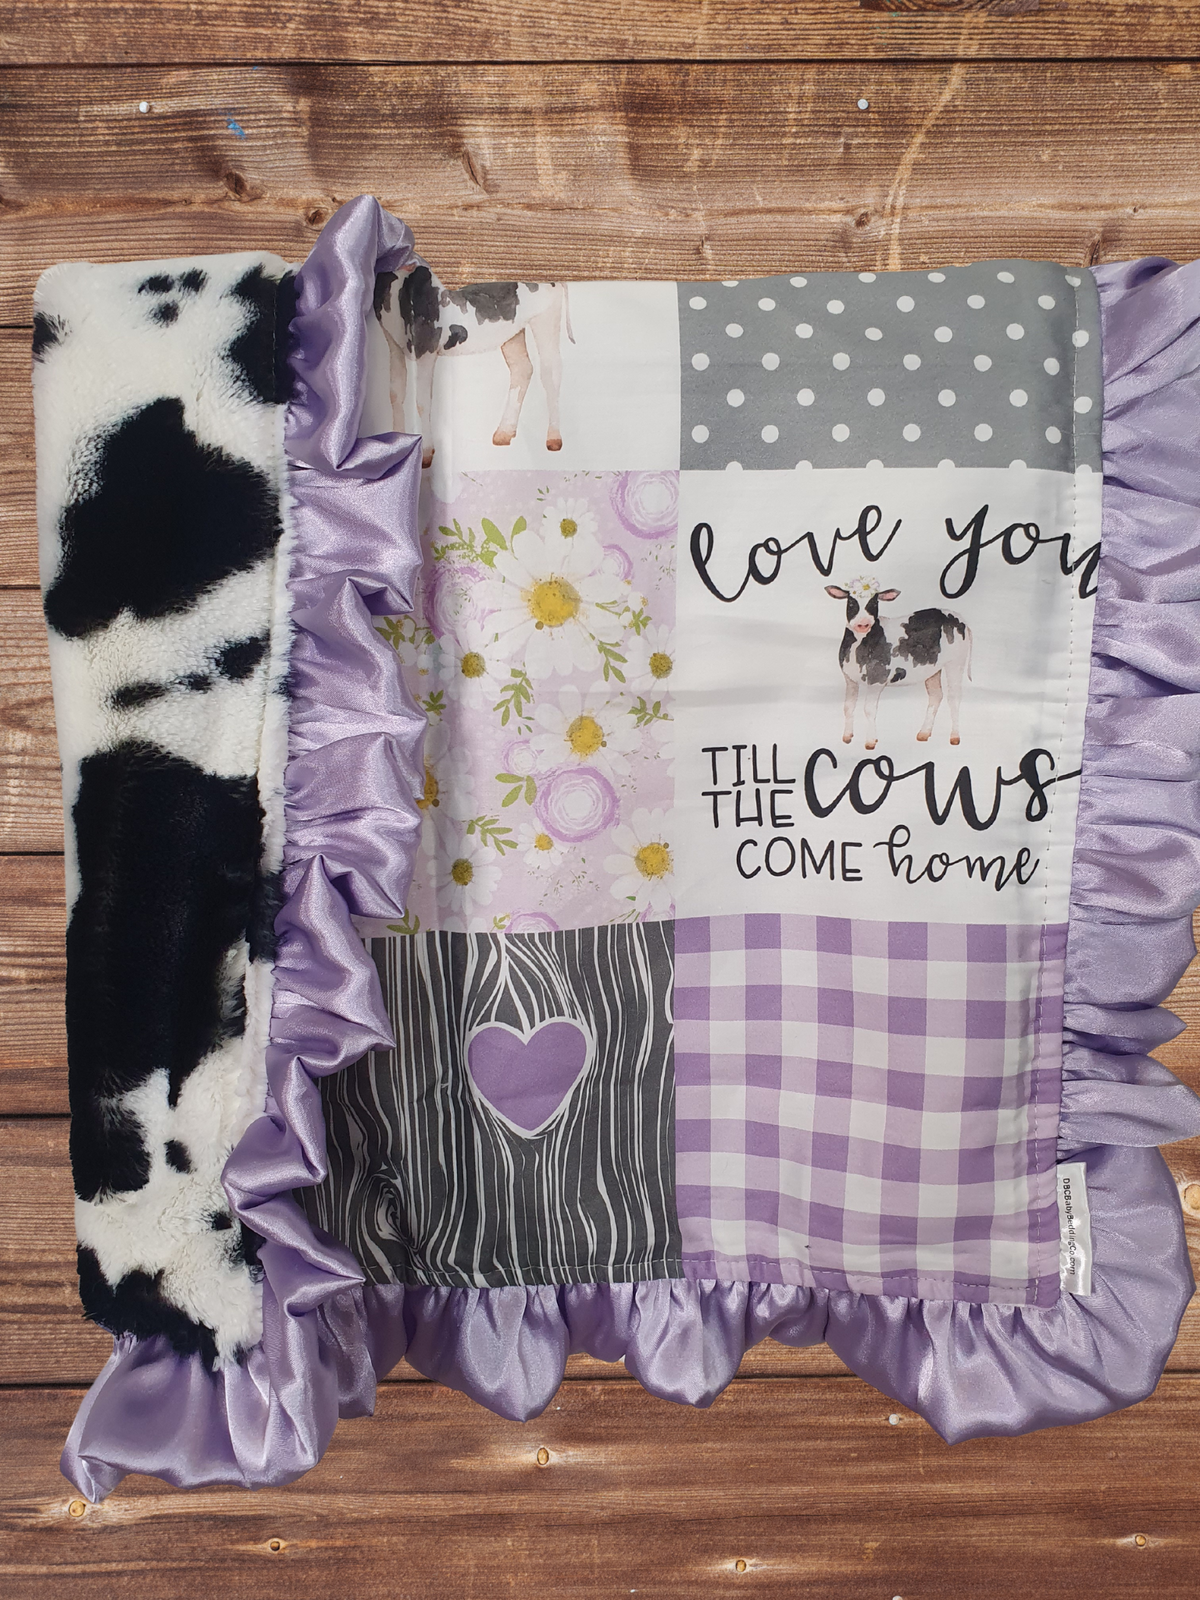 Ruffle Baby Lovey - Lilac Cows Come Home and Black White Cow Minky Lovey - DBC Baby Bedding Co 